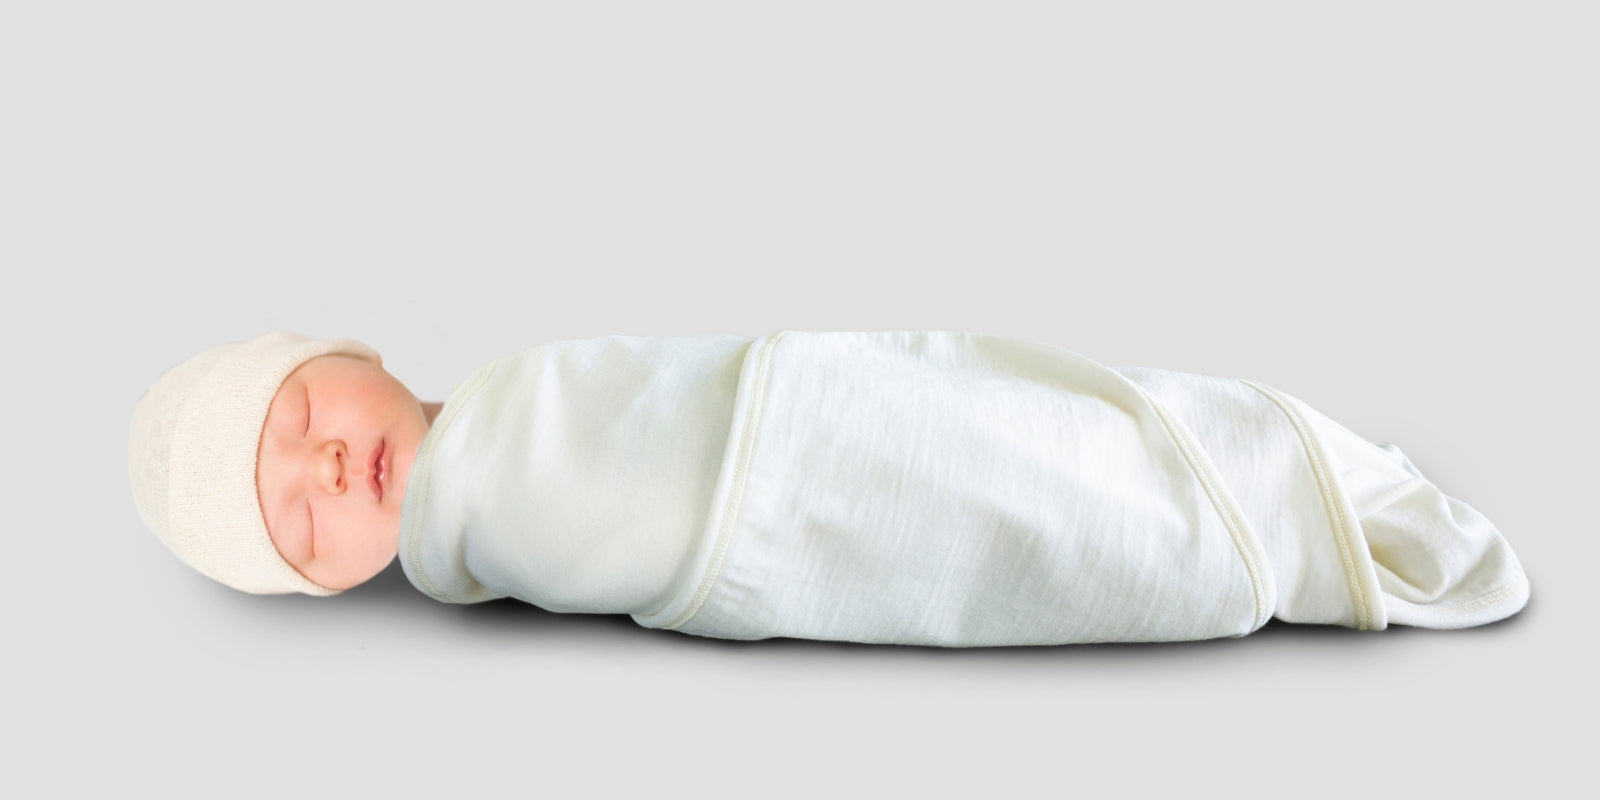 Baby sleeping in a merino cream swaddle wrap or swaddle blanket, also with a cream merino hat. The merino swaddle wrap is made in New Zealand. Similar to a swaddle blanket or swaddle wrap. Soft cream merino wool.